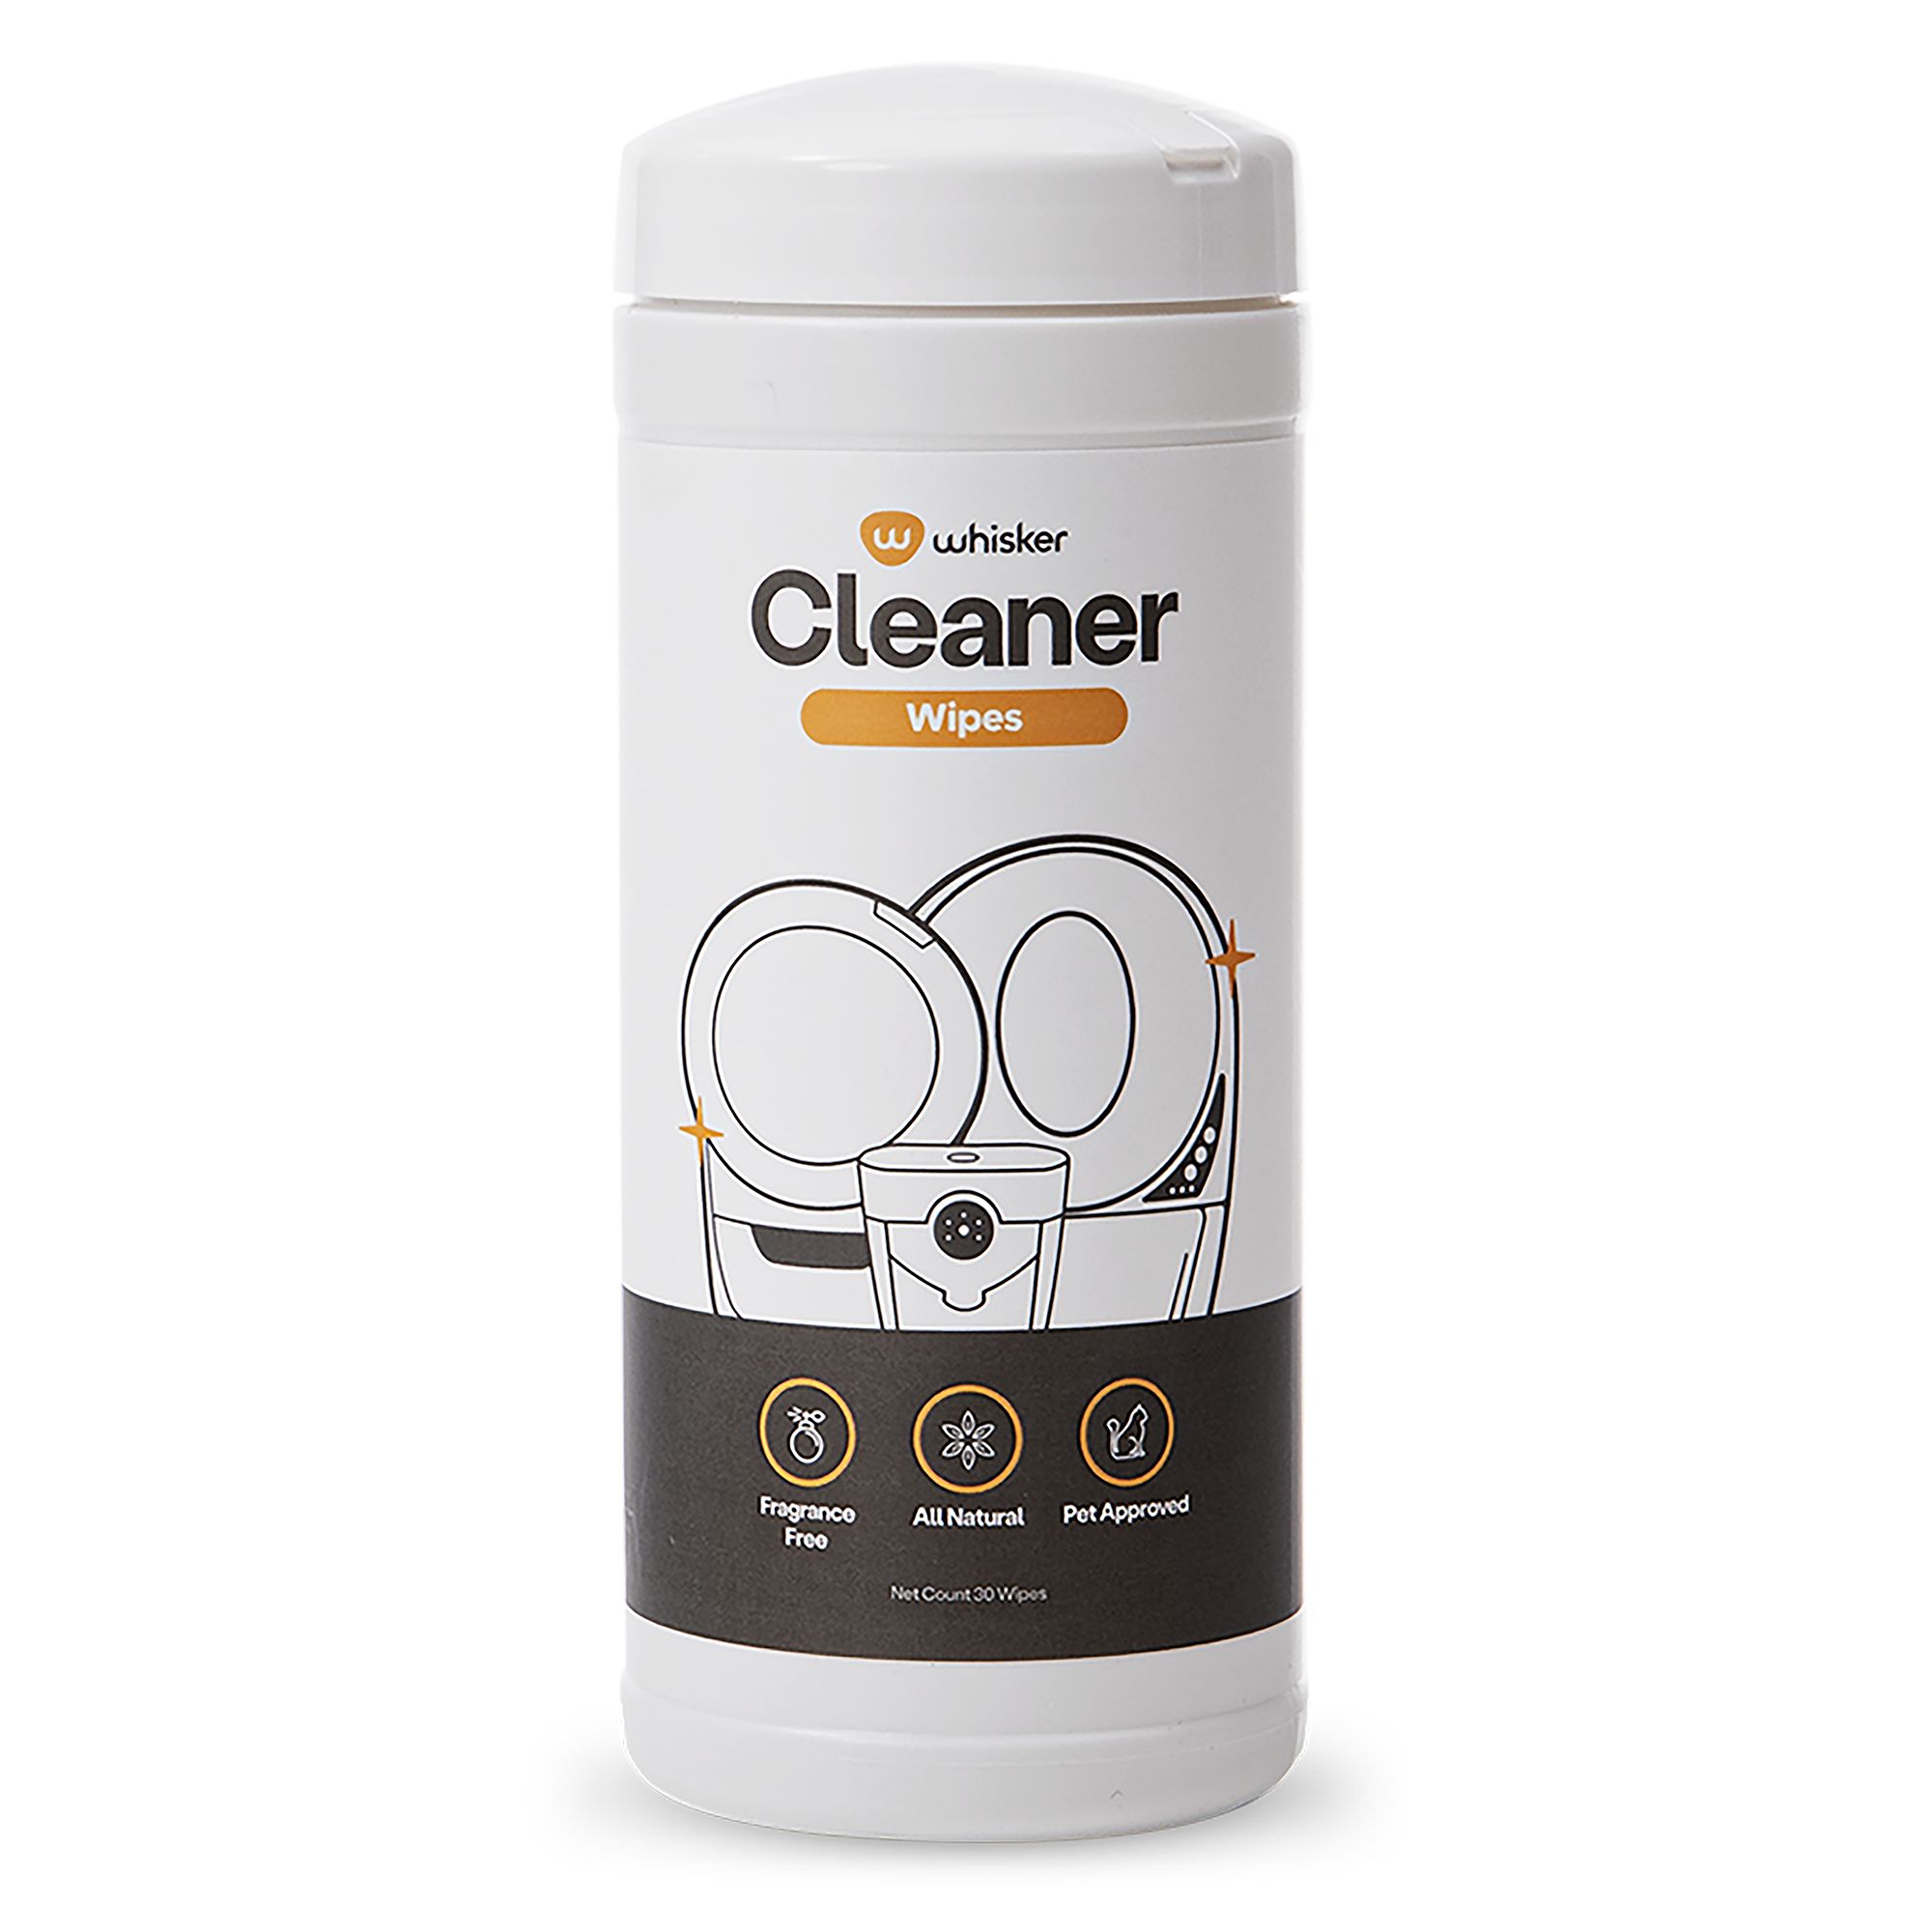 Cleaner Wipes - Fragrance Free by Whisker